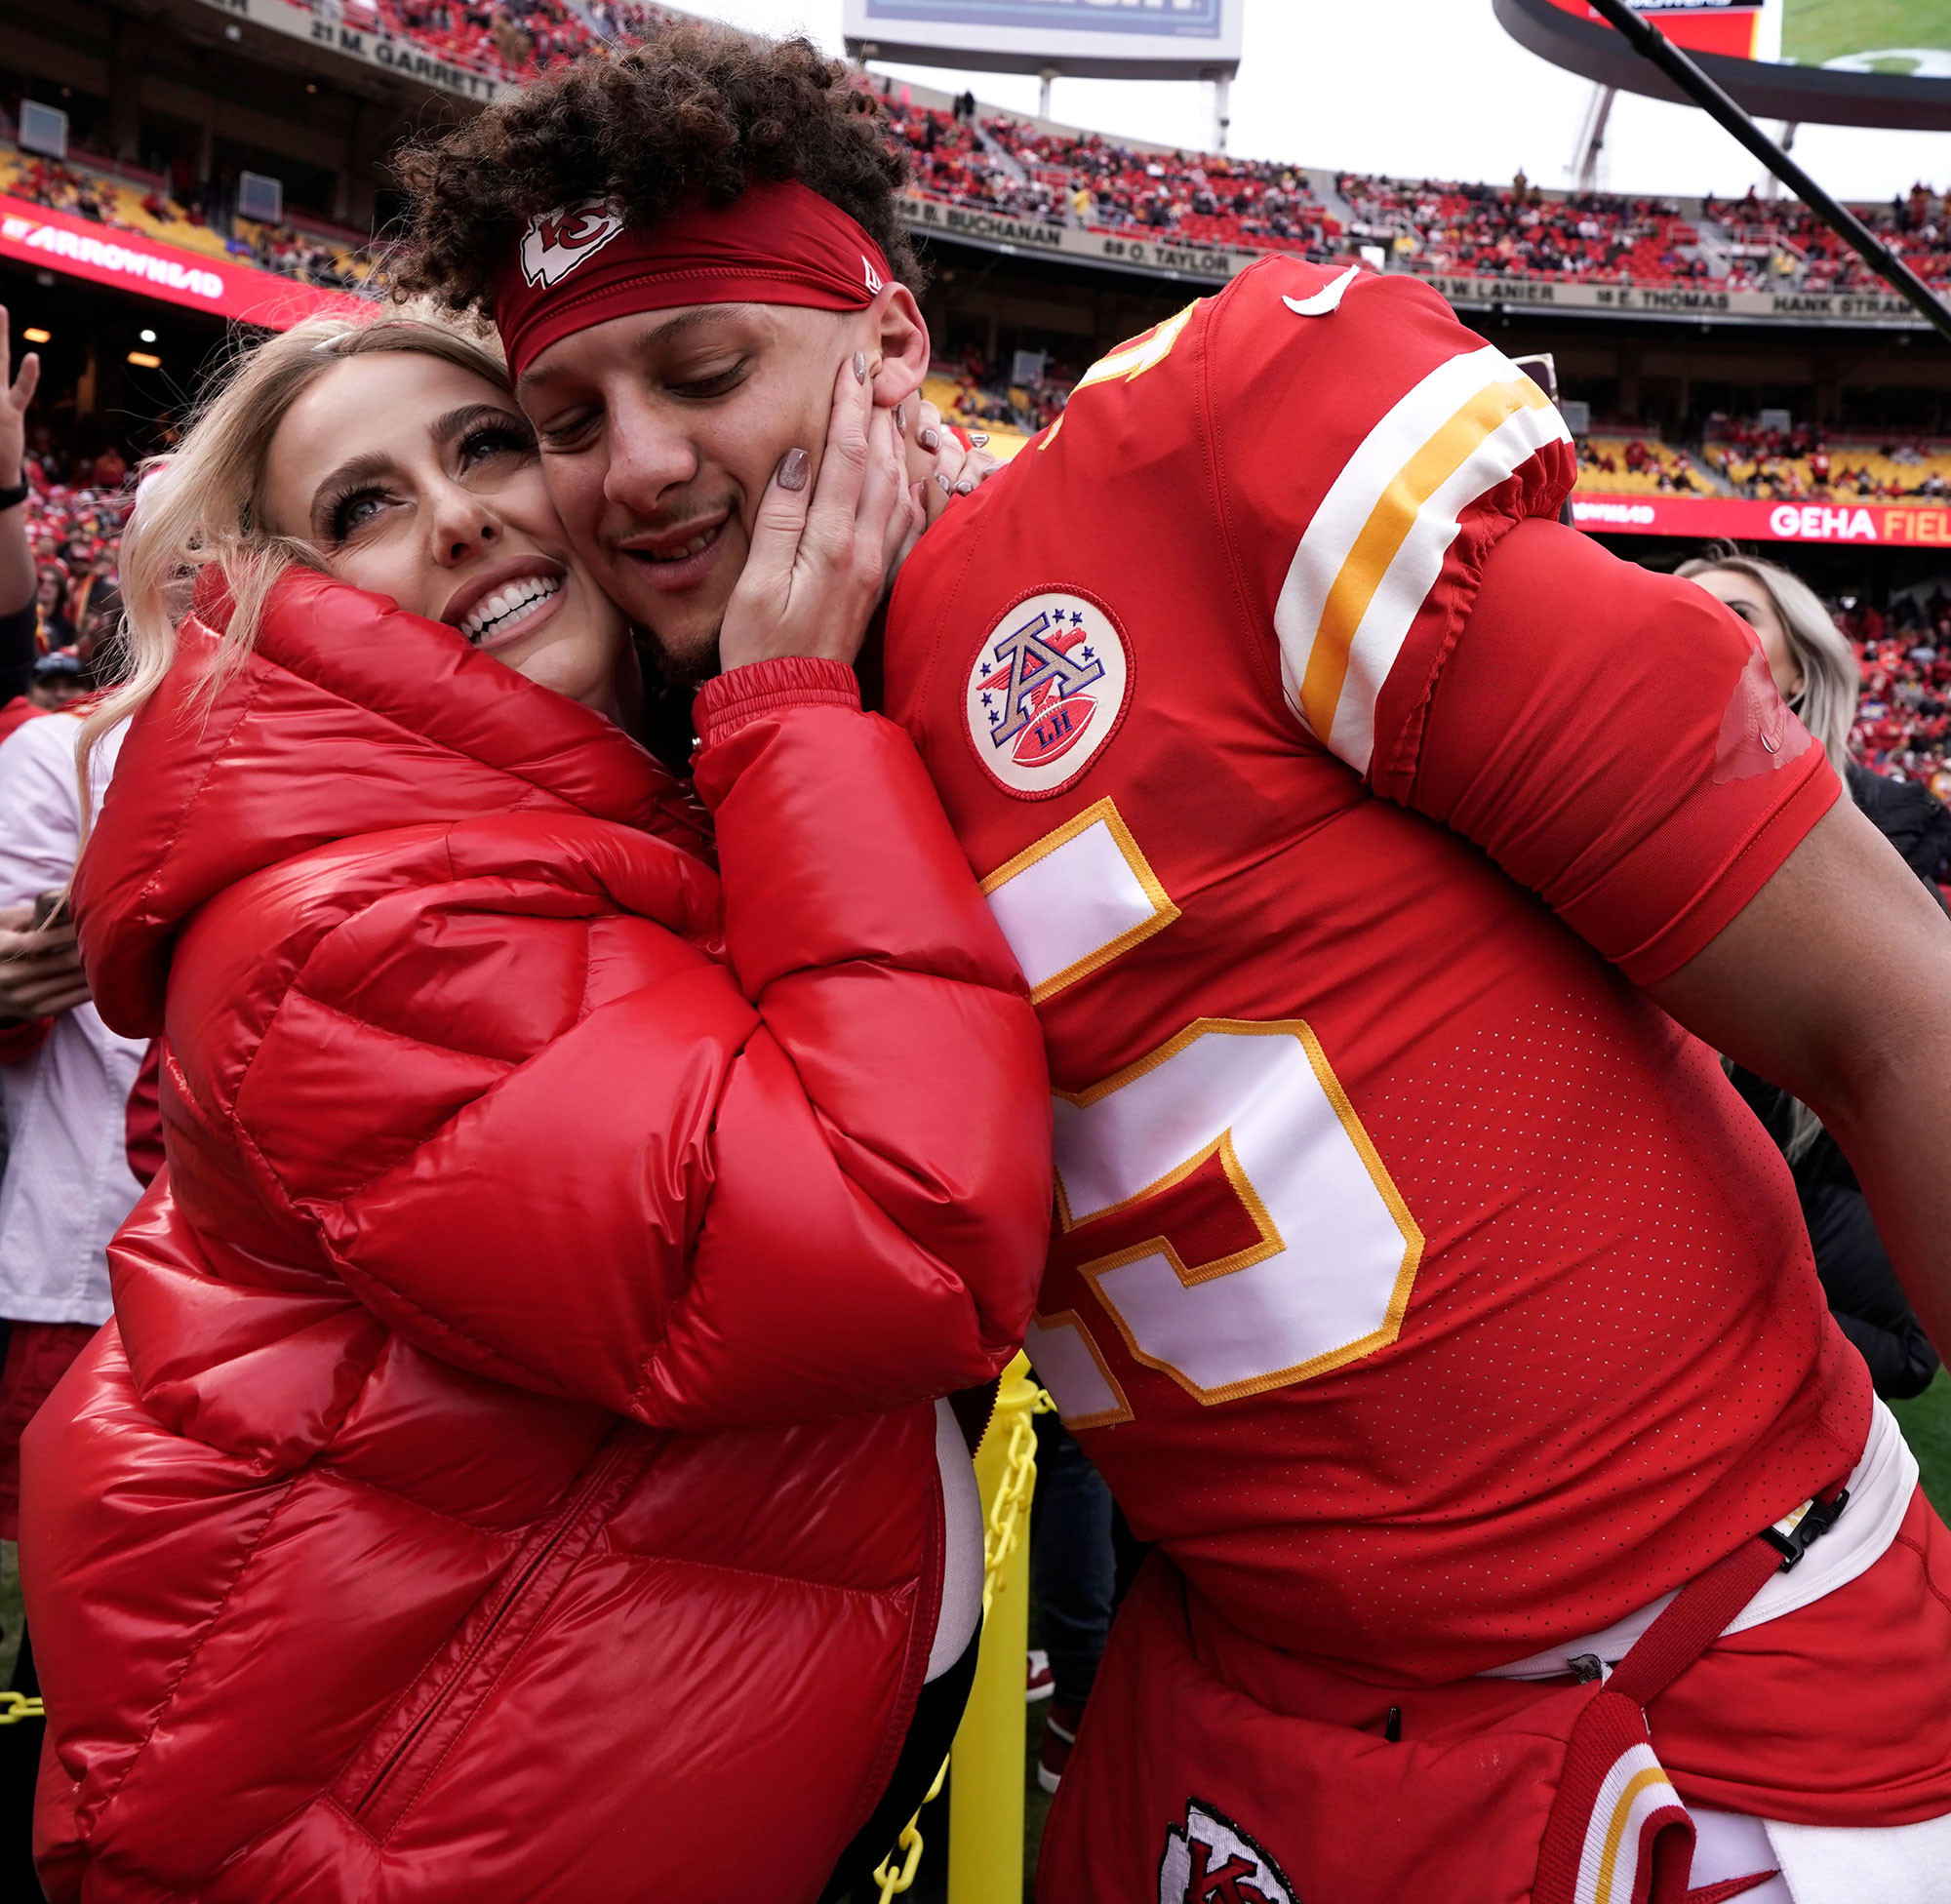 Patrick Mahomes excited over Kansas City Royals' hot start to 2021